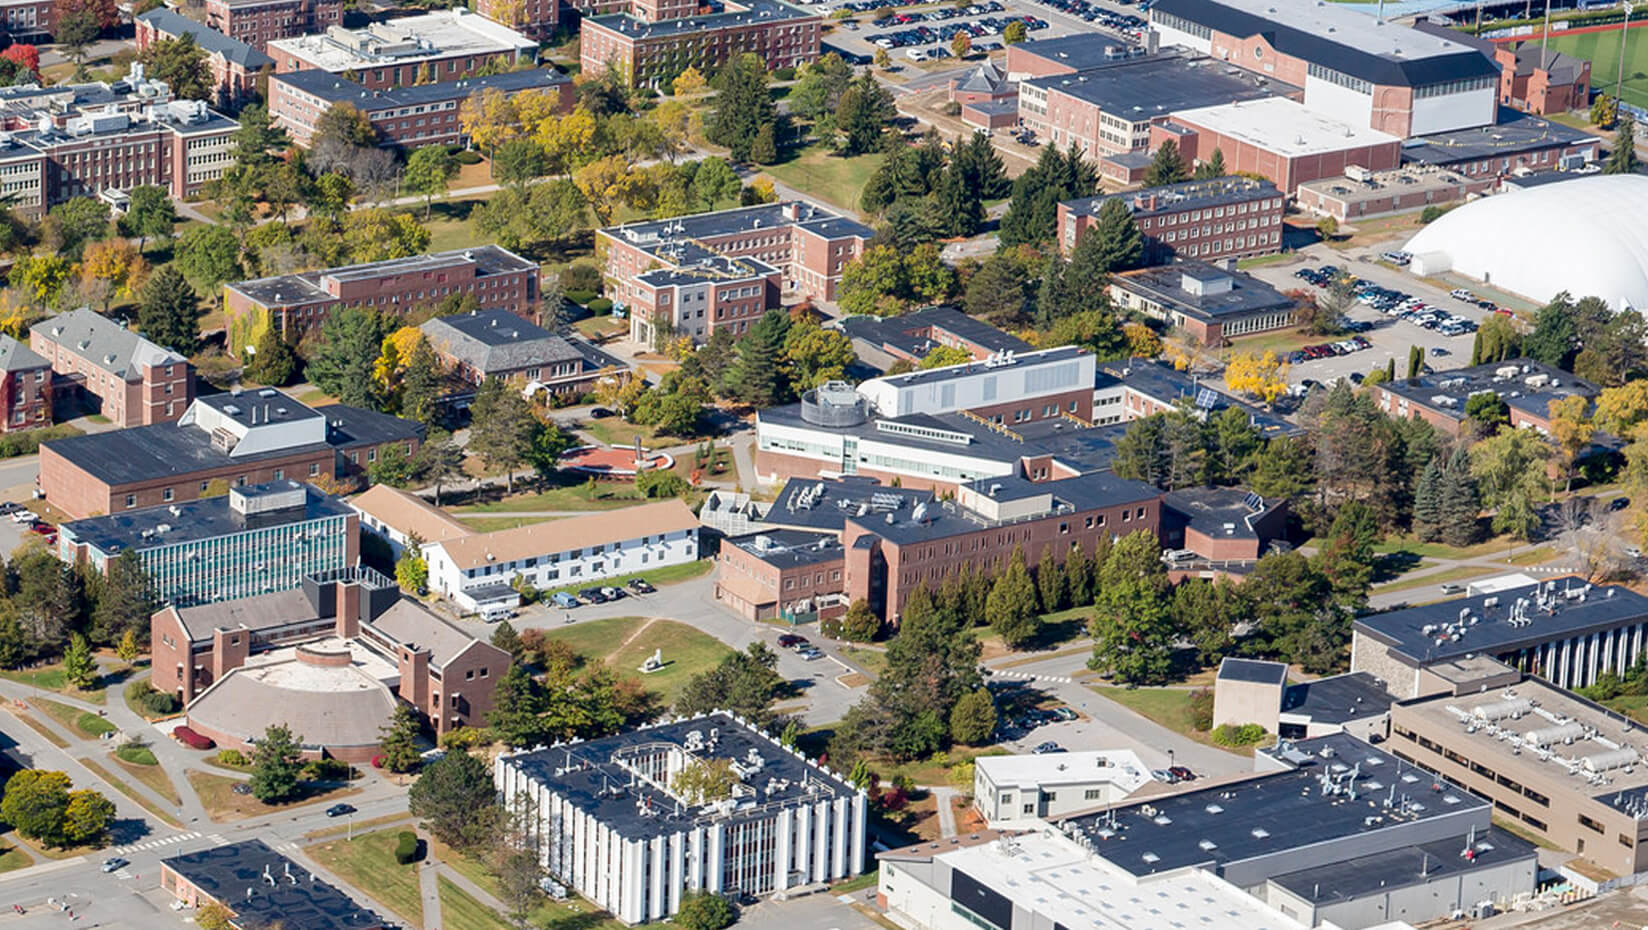 Aerial view of engineering buildings on UMaine's campus in Orono